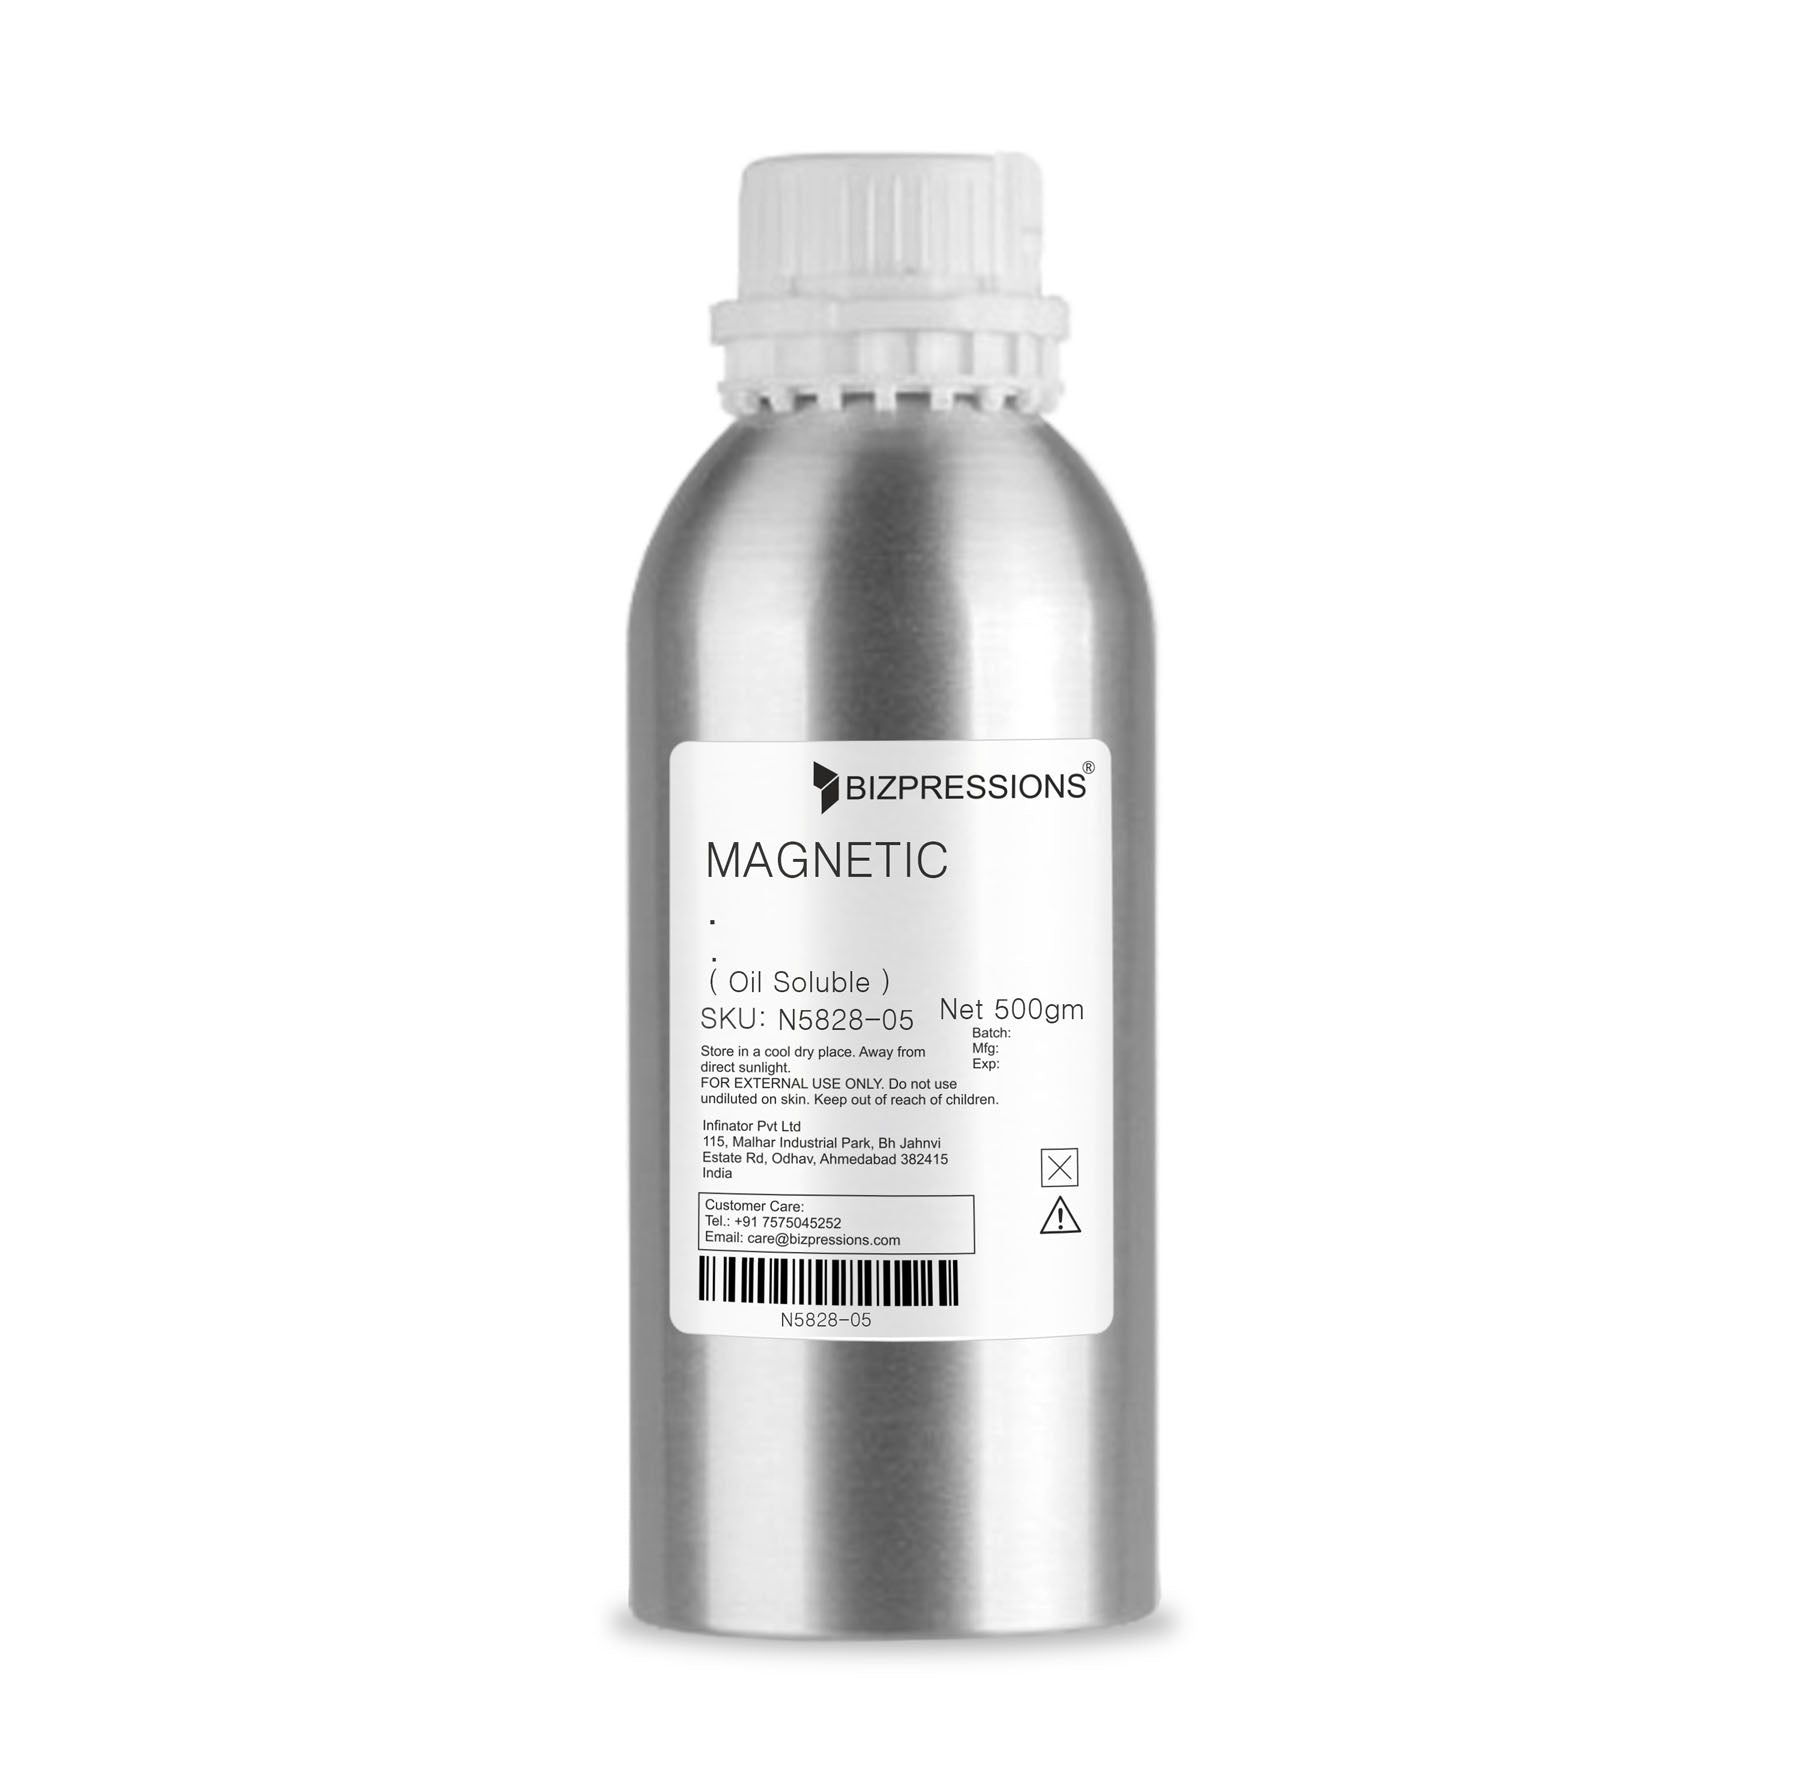 MAGNETIC - Fragrance ( Oil Soluble ) - 500 gm